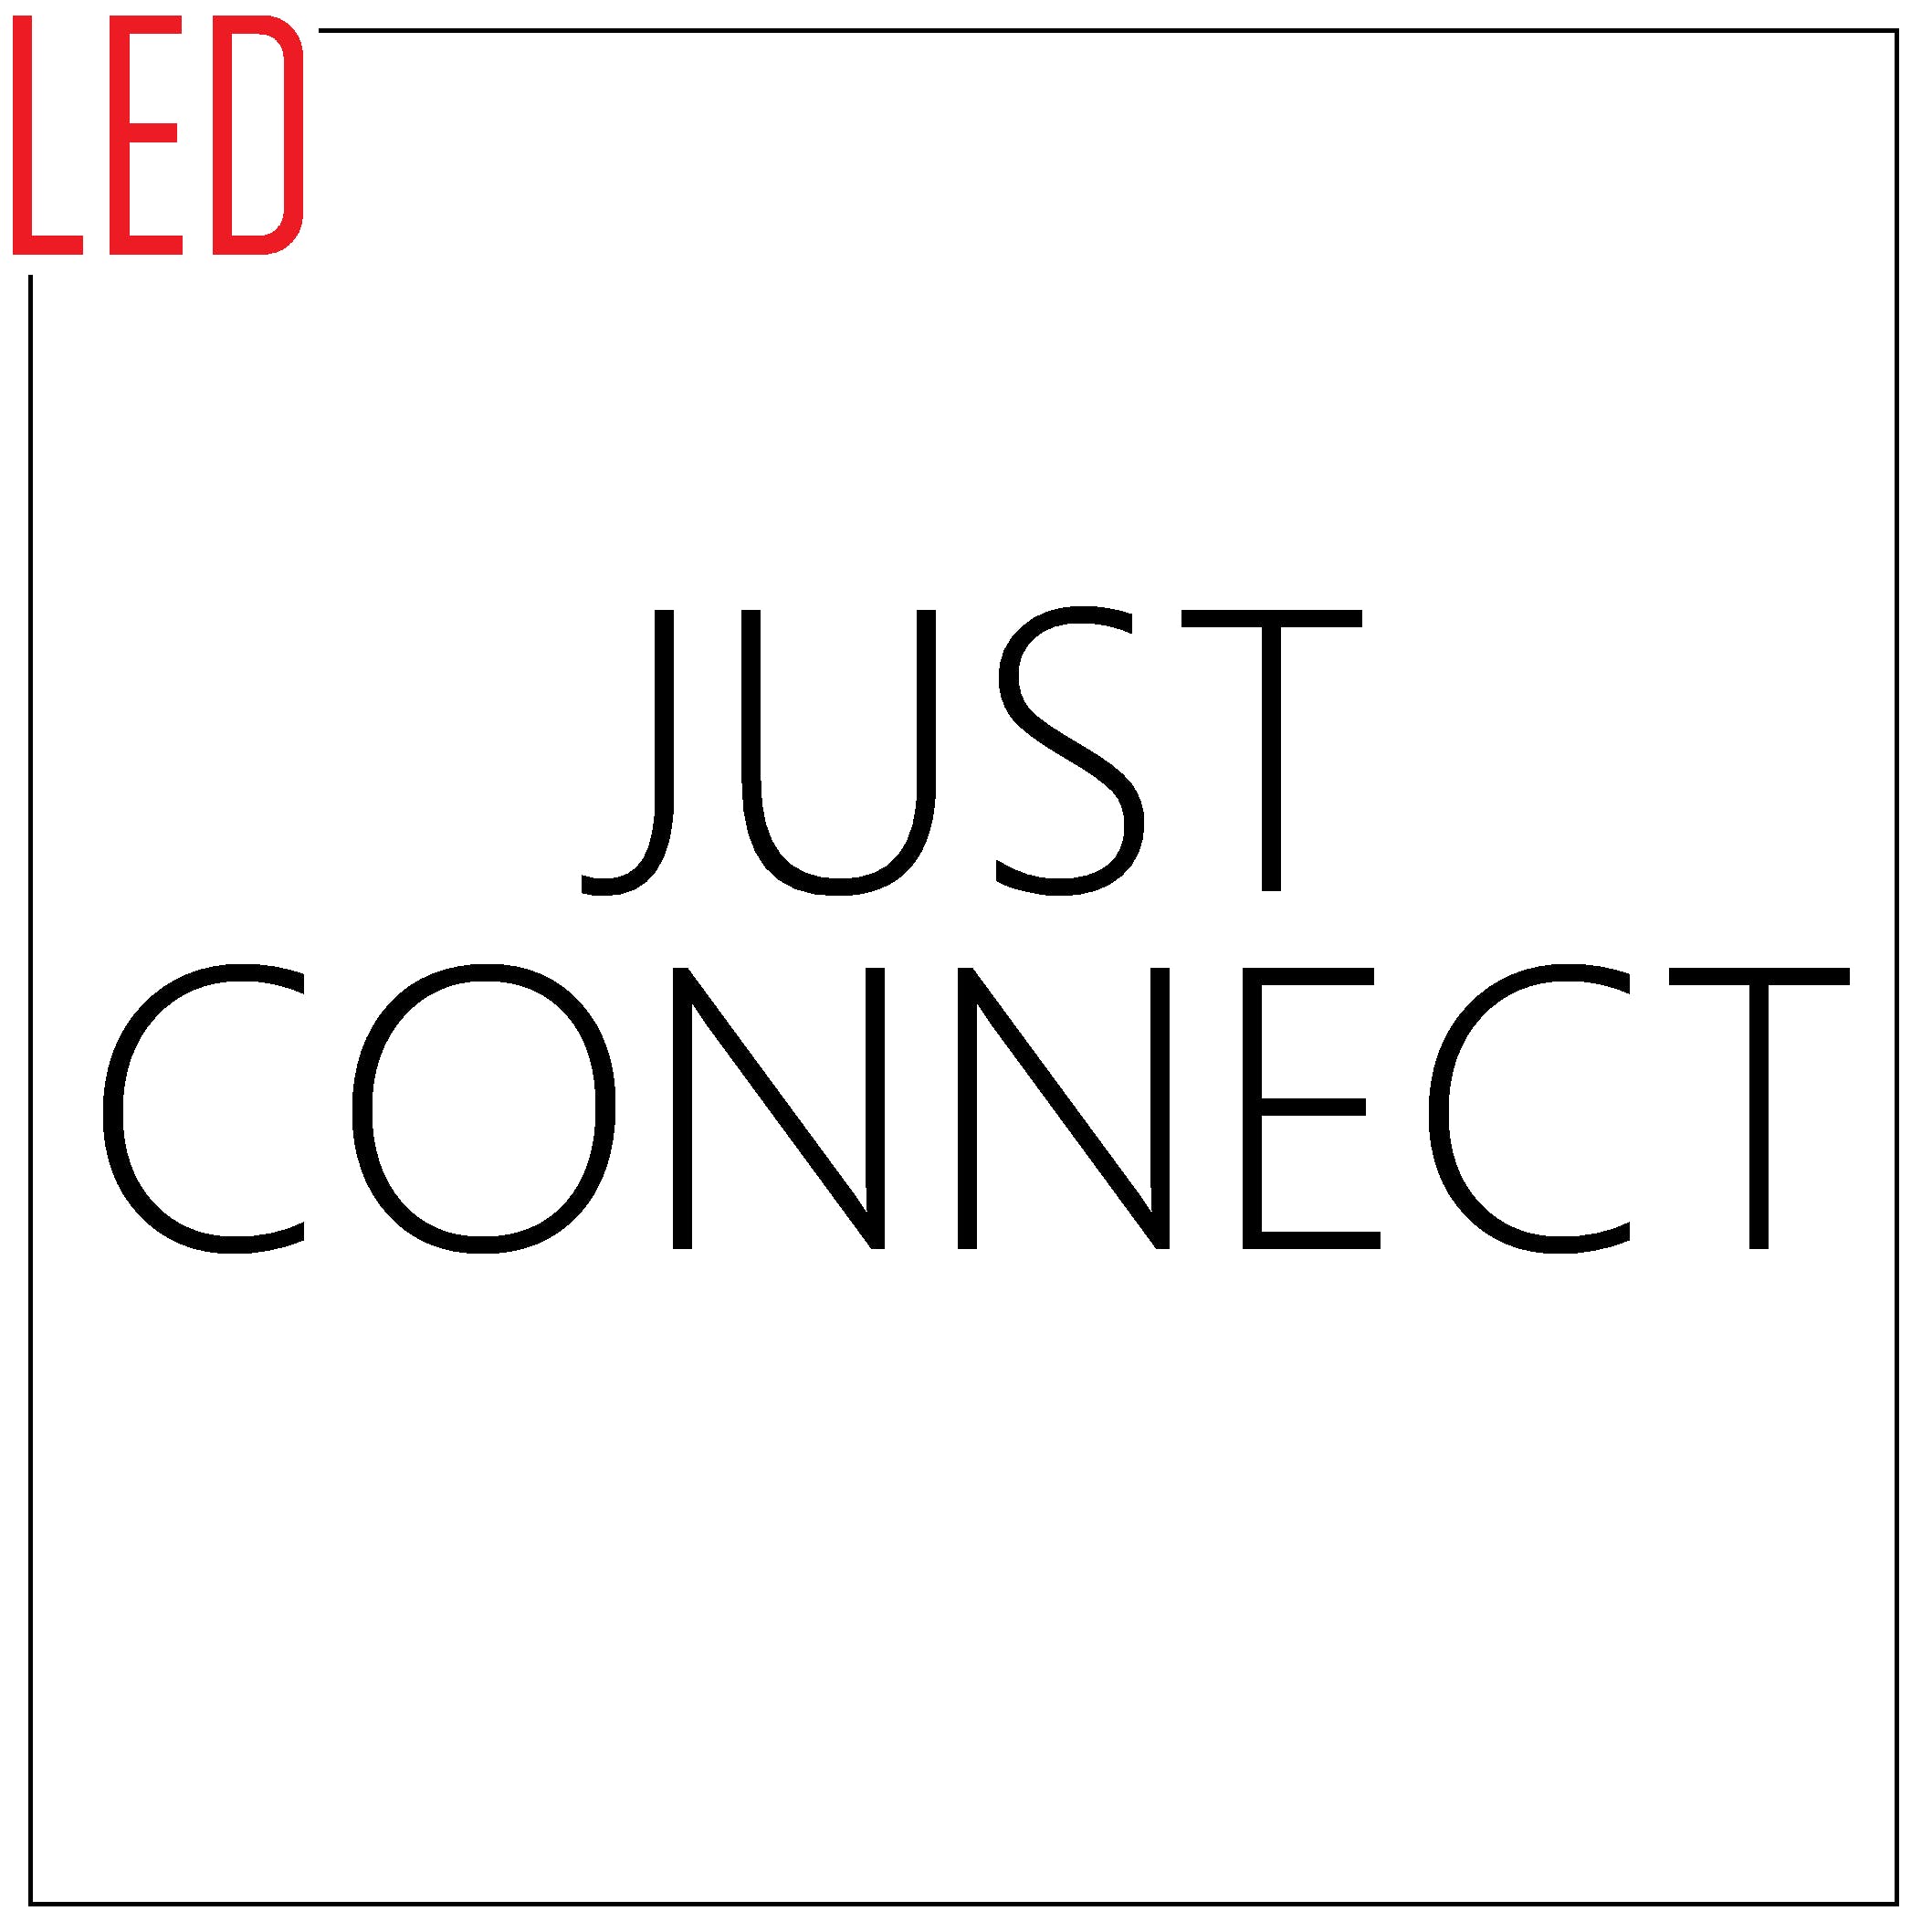 Just Connect: Try NetGiving Rather Than Networking, James Eder, Founder @The Beans Group, Causr media 1